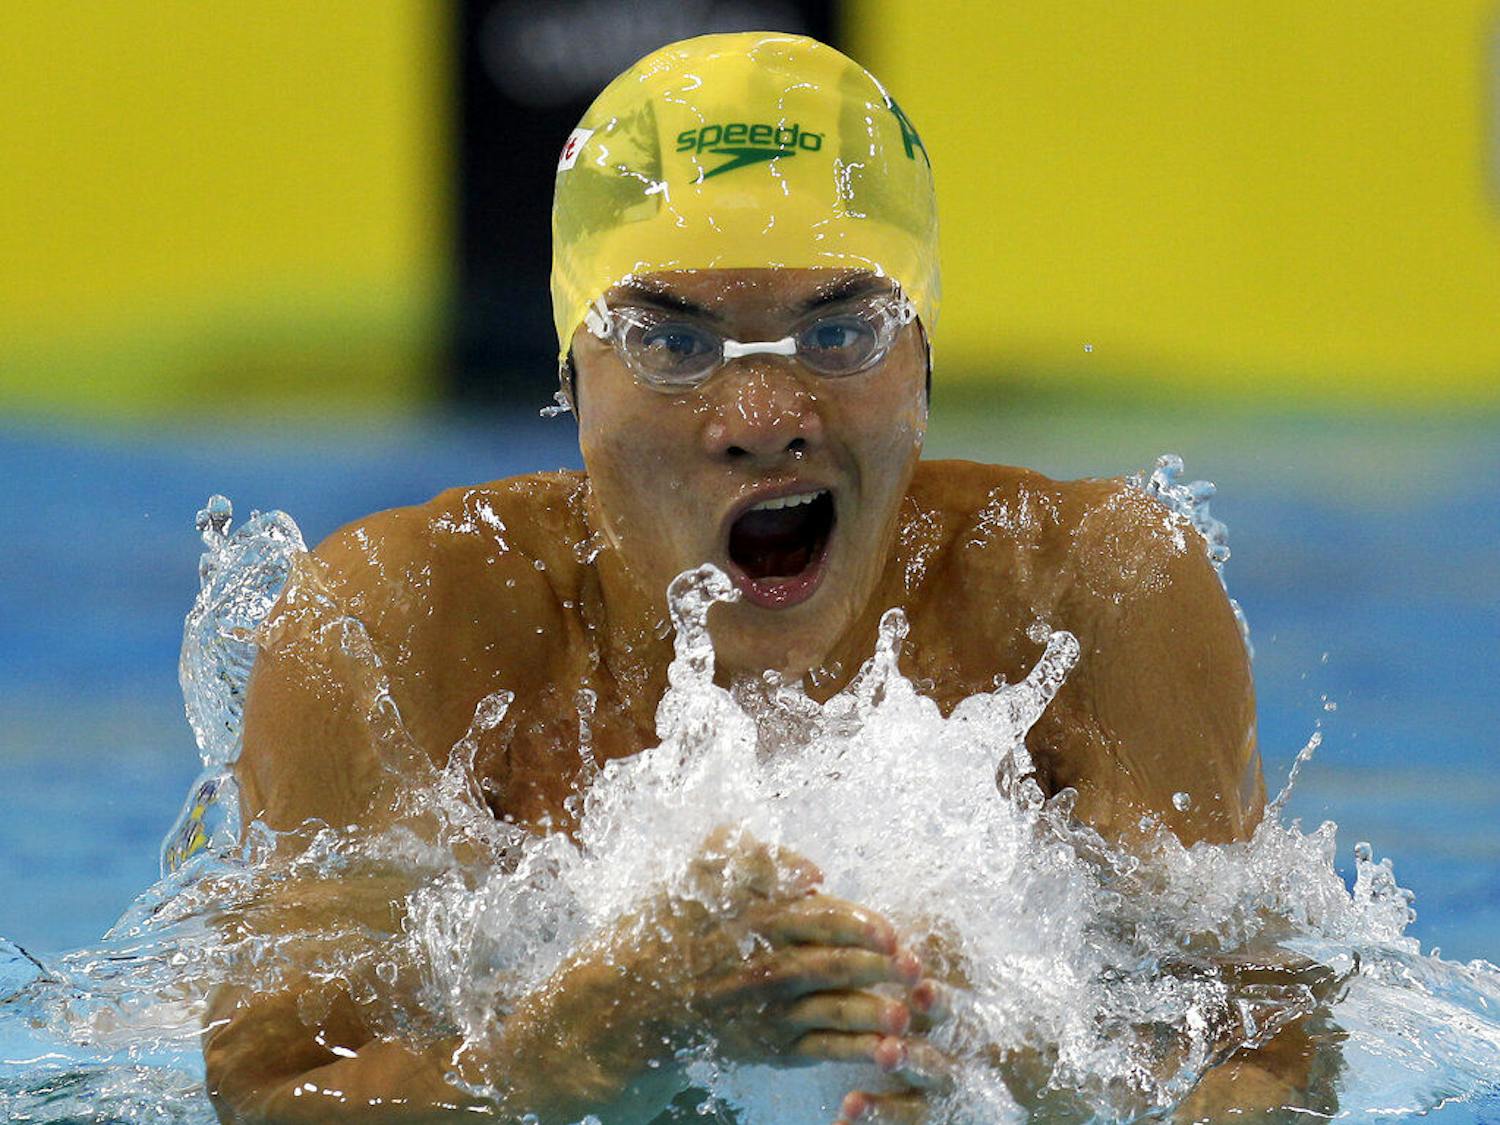 FILE - In this Saturday, Dec. 18, 2010 file photo, Kenneth To from Australia swims a Men's 100 meter Individual Medley heat at the FINA Short Course Swimming World Championships in Dubai, United Arab Emirates. Kenneth To, a former swimming world championships medalist for Australia, died Tuesday March 19, 2019, after falling ill training with the University of Florida. He was aged 26. (AP Photo/Michael Sohn, File)